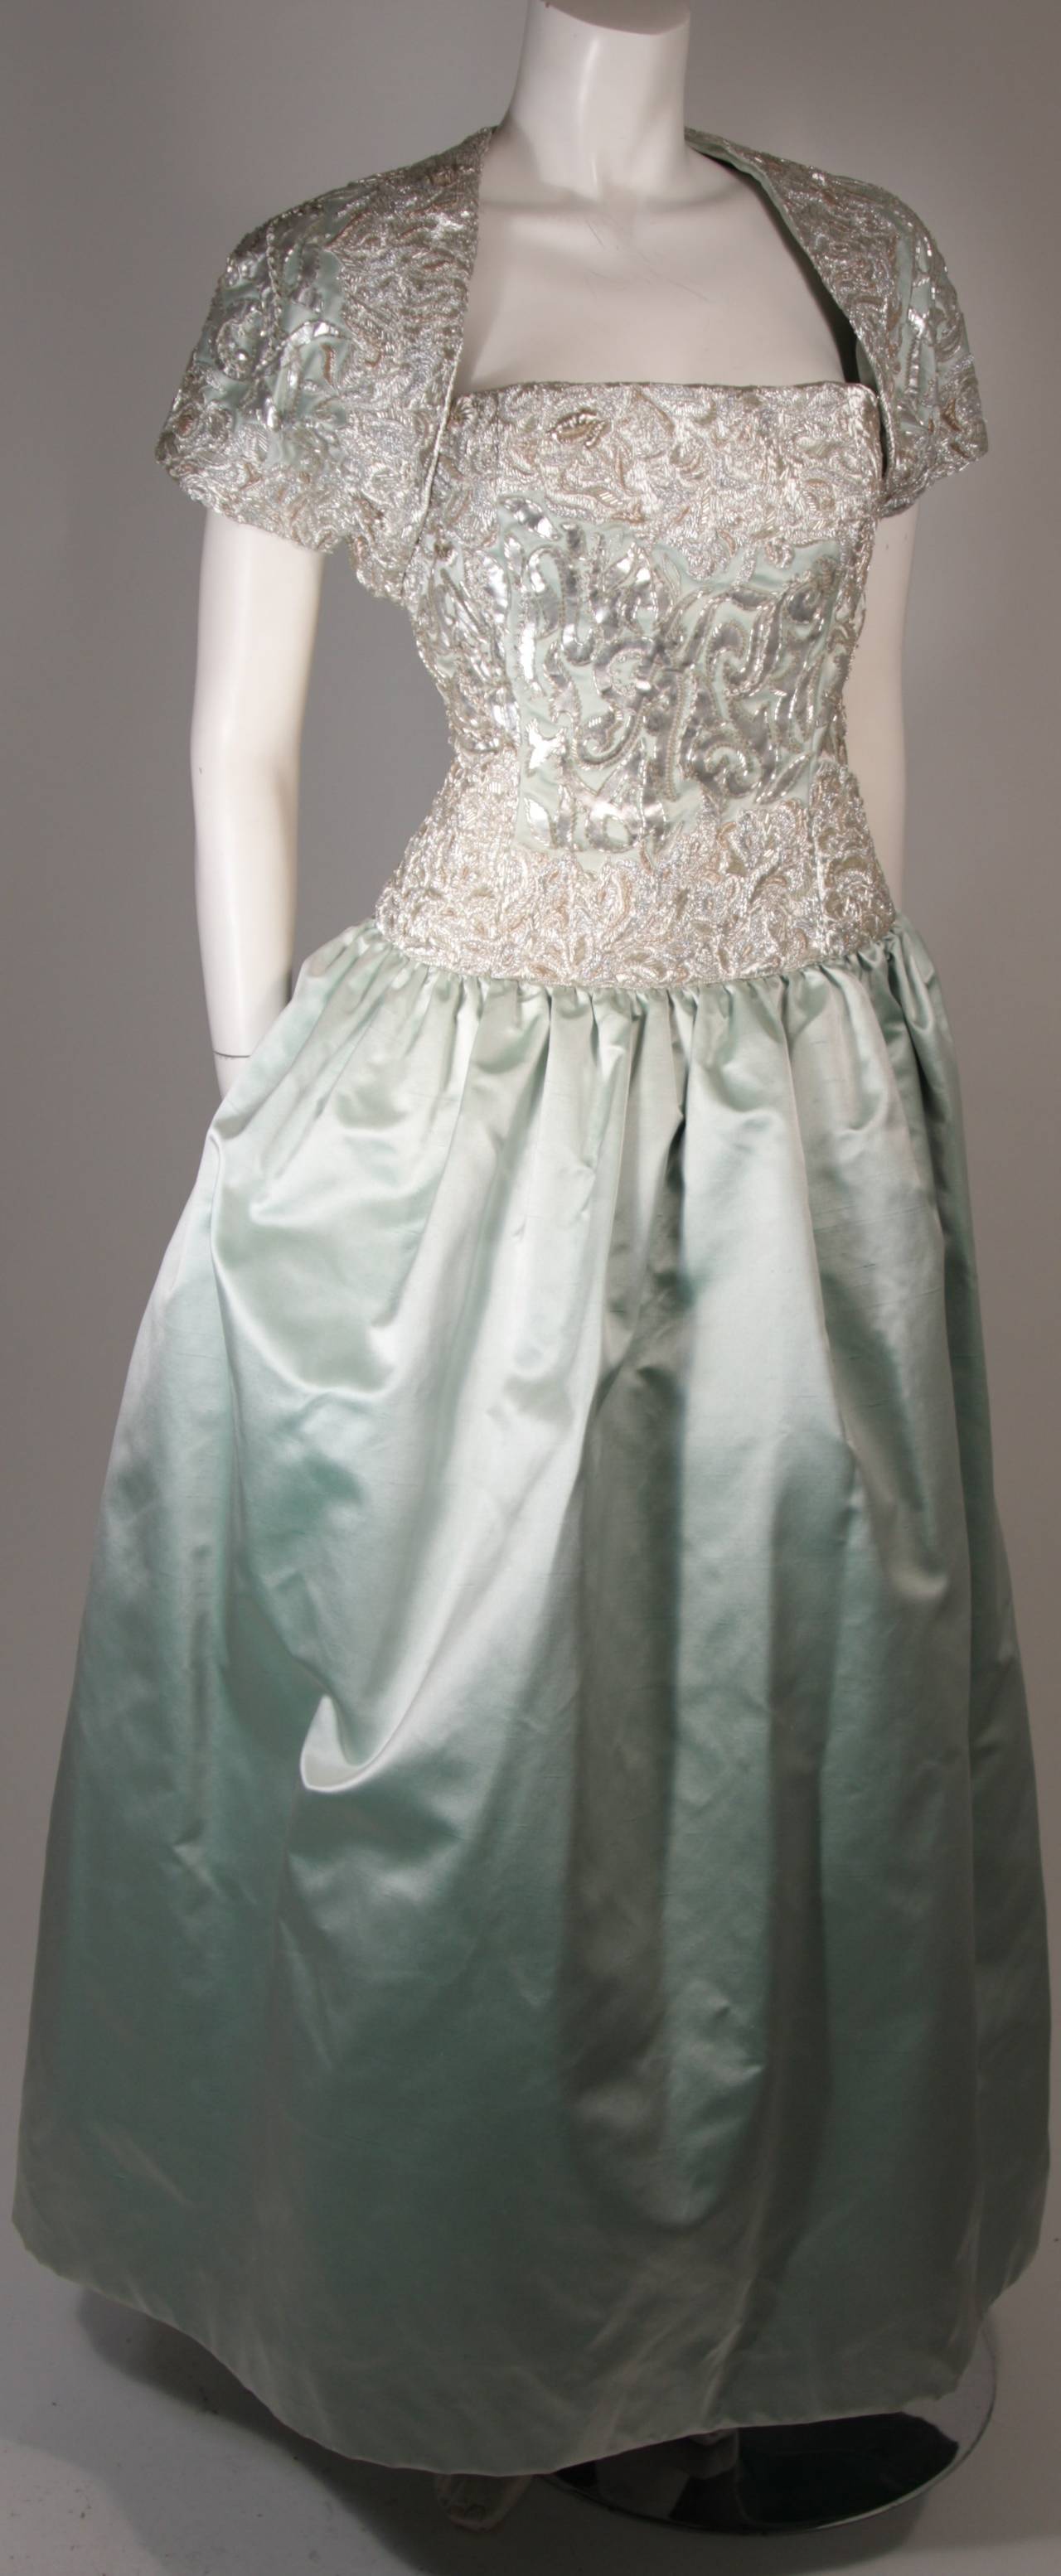 This Oscar De La Renta design is available for viewing at our Beverly Hills Boutique. We offer a large selection of evening gowns and luxury garments.

This ensemble is composed of an aqua/ sea foam green silk and features heavy embellishment. The